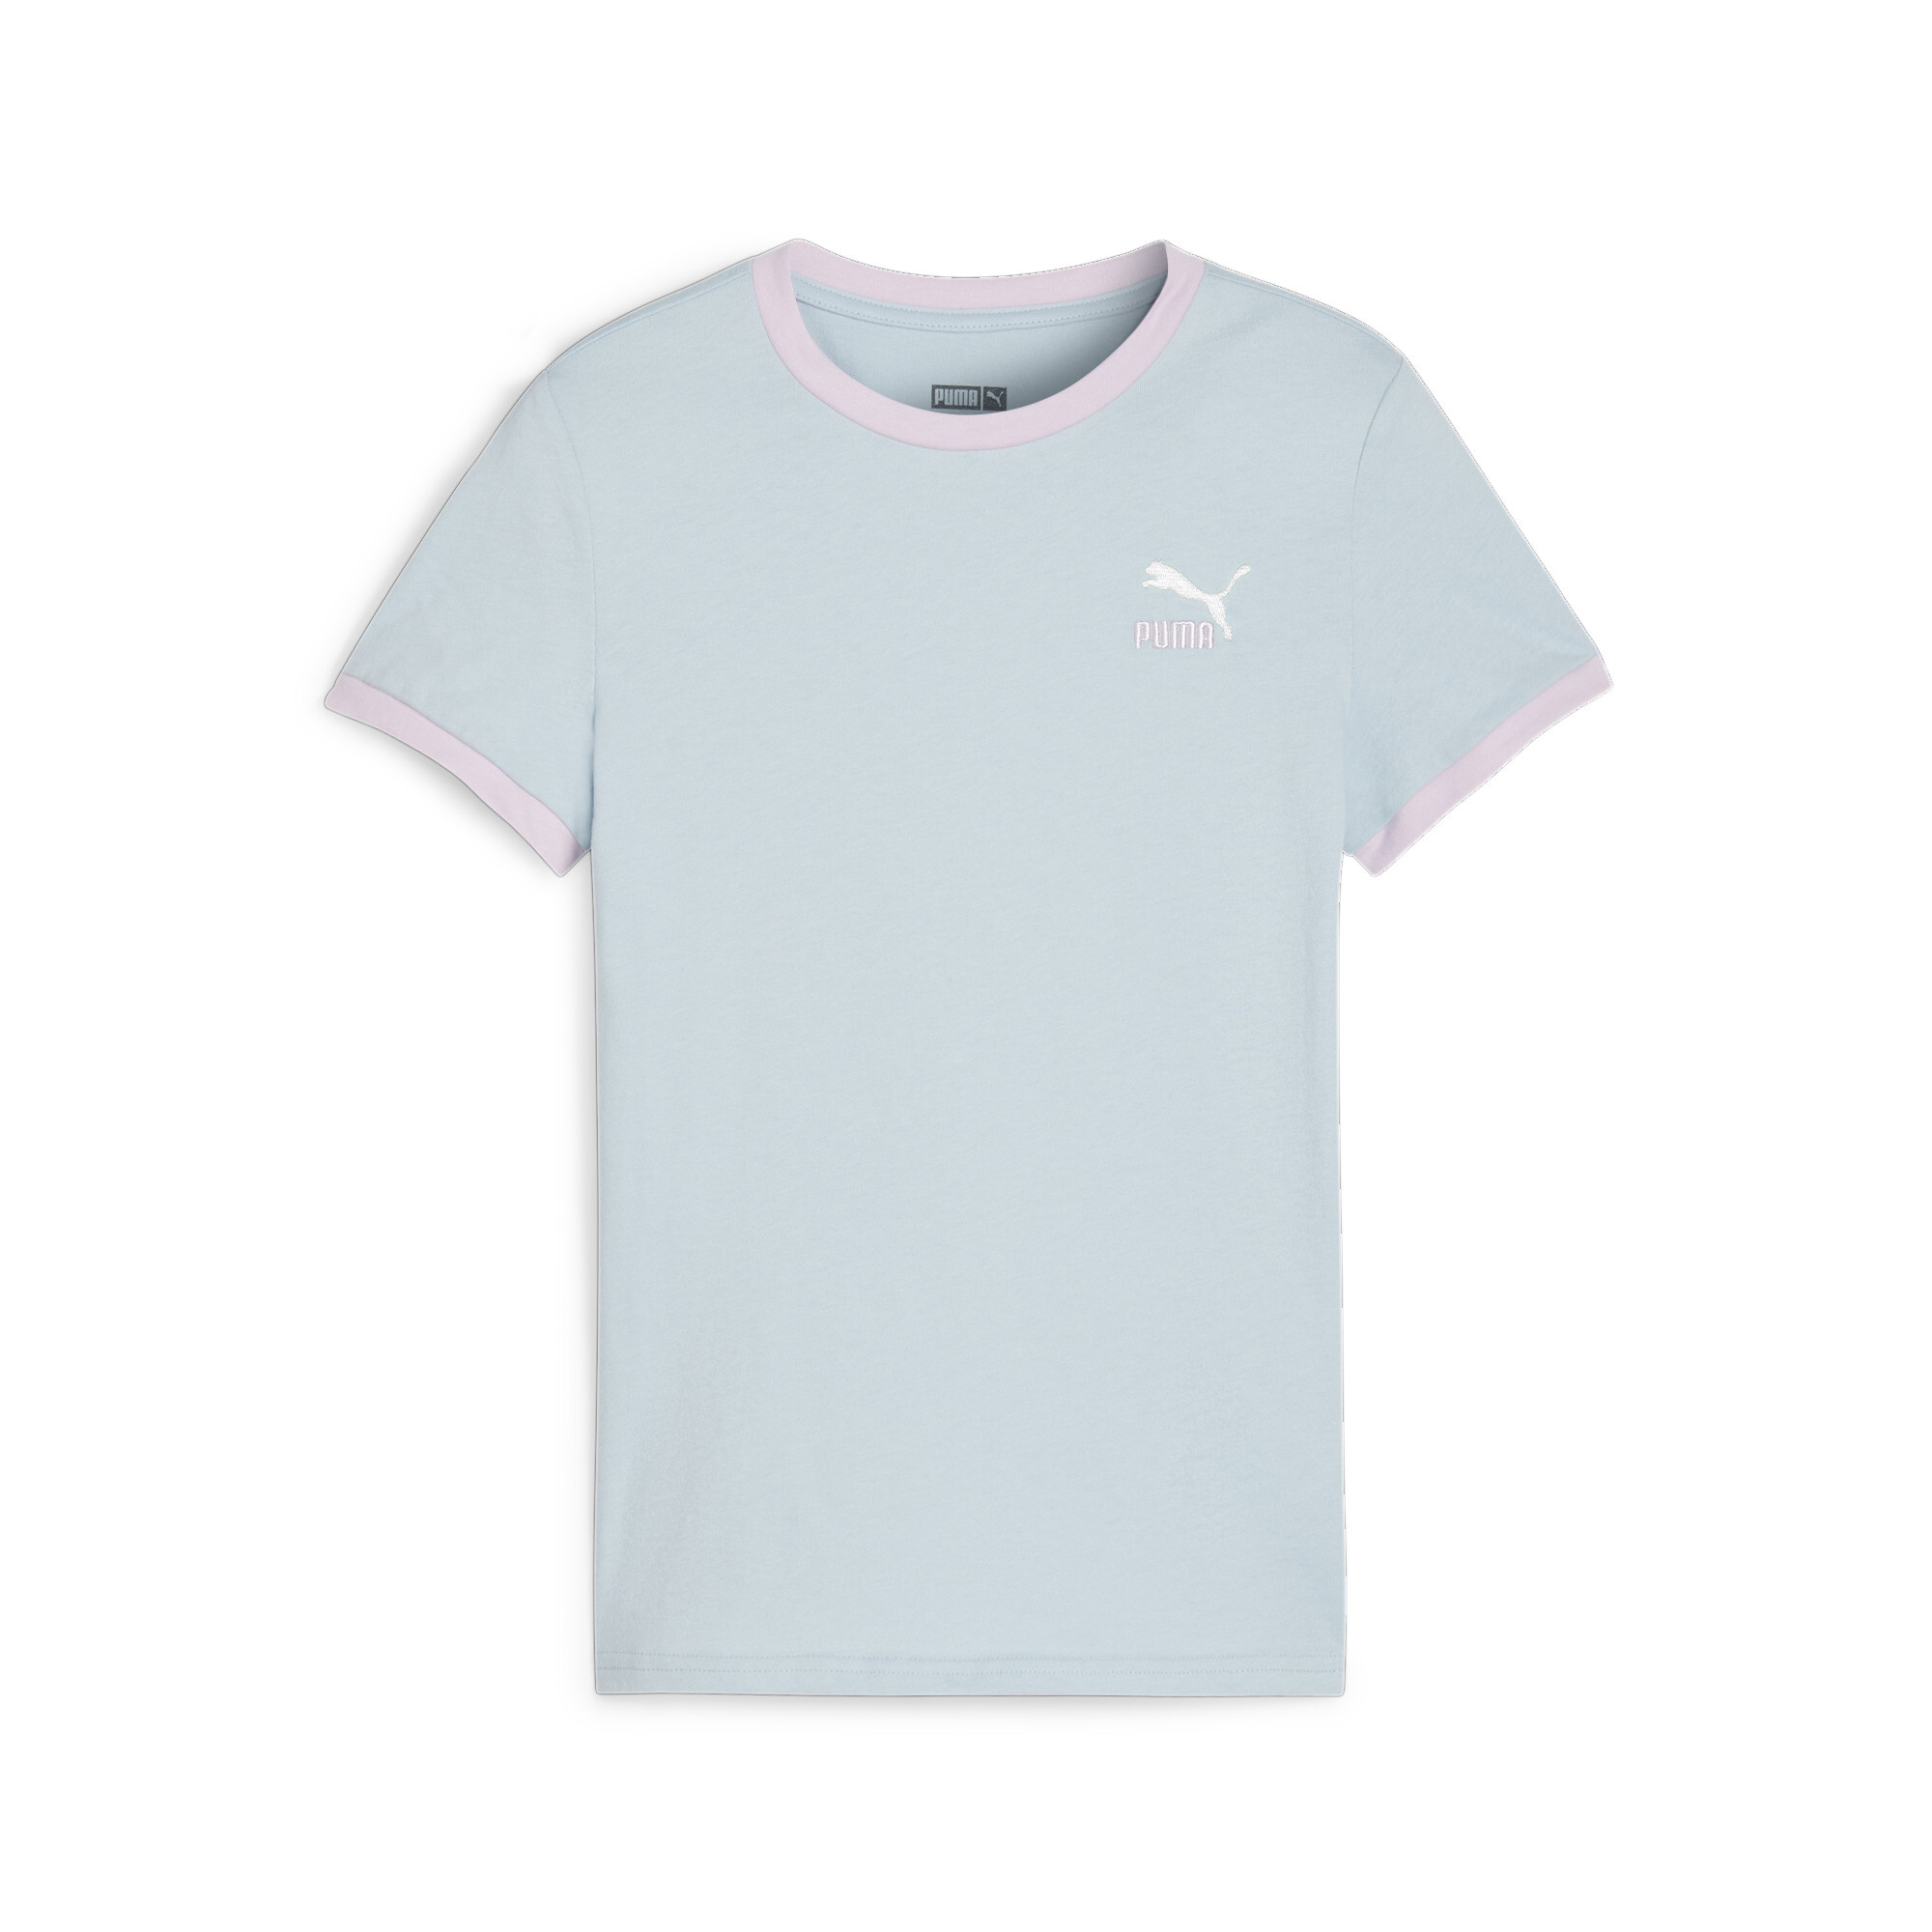 PUMA CLASSICS Match Point T-Shirt In Blue, Size 7-8 Youth